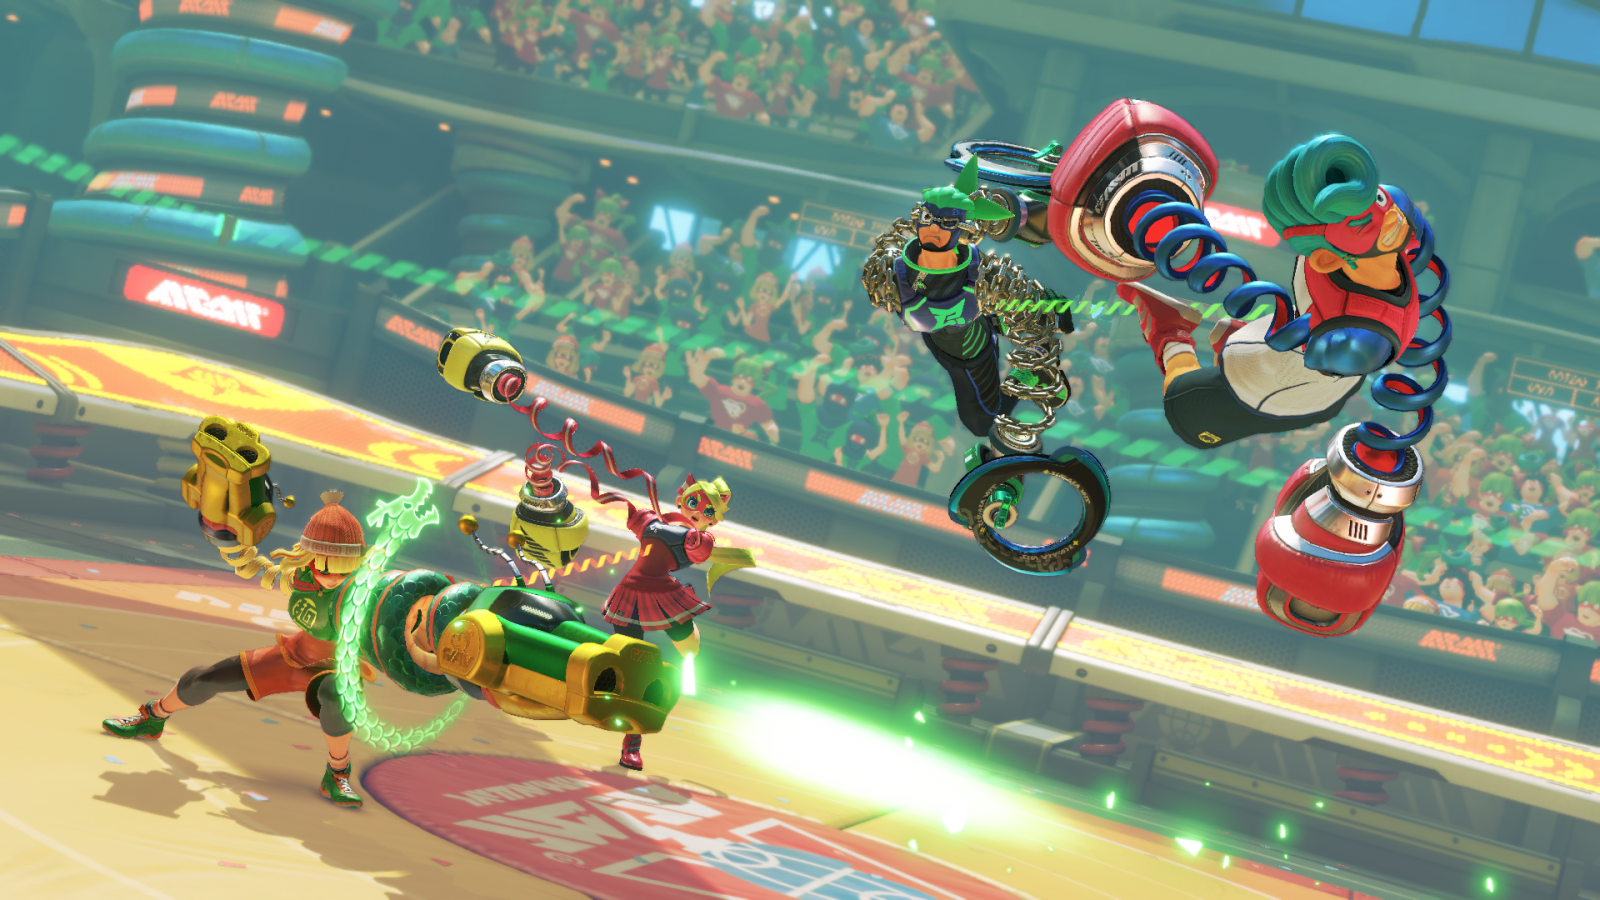 Arms review multiplayer